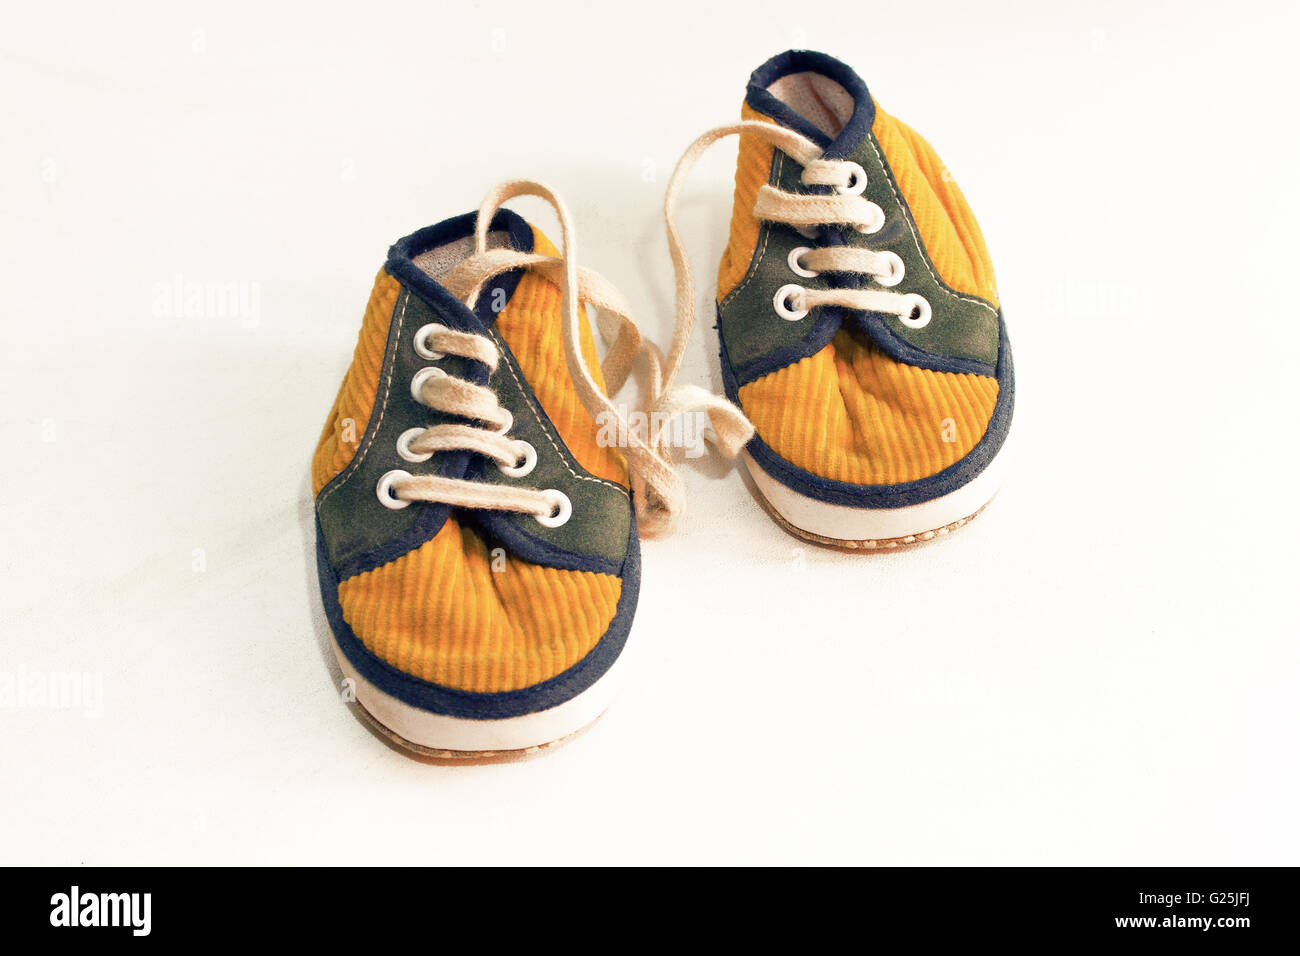 Gumshoe On The White Background White Sneakers Laces Photo And Picture For  Free Download - Pngtree